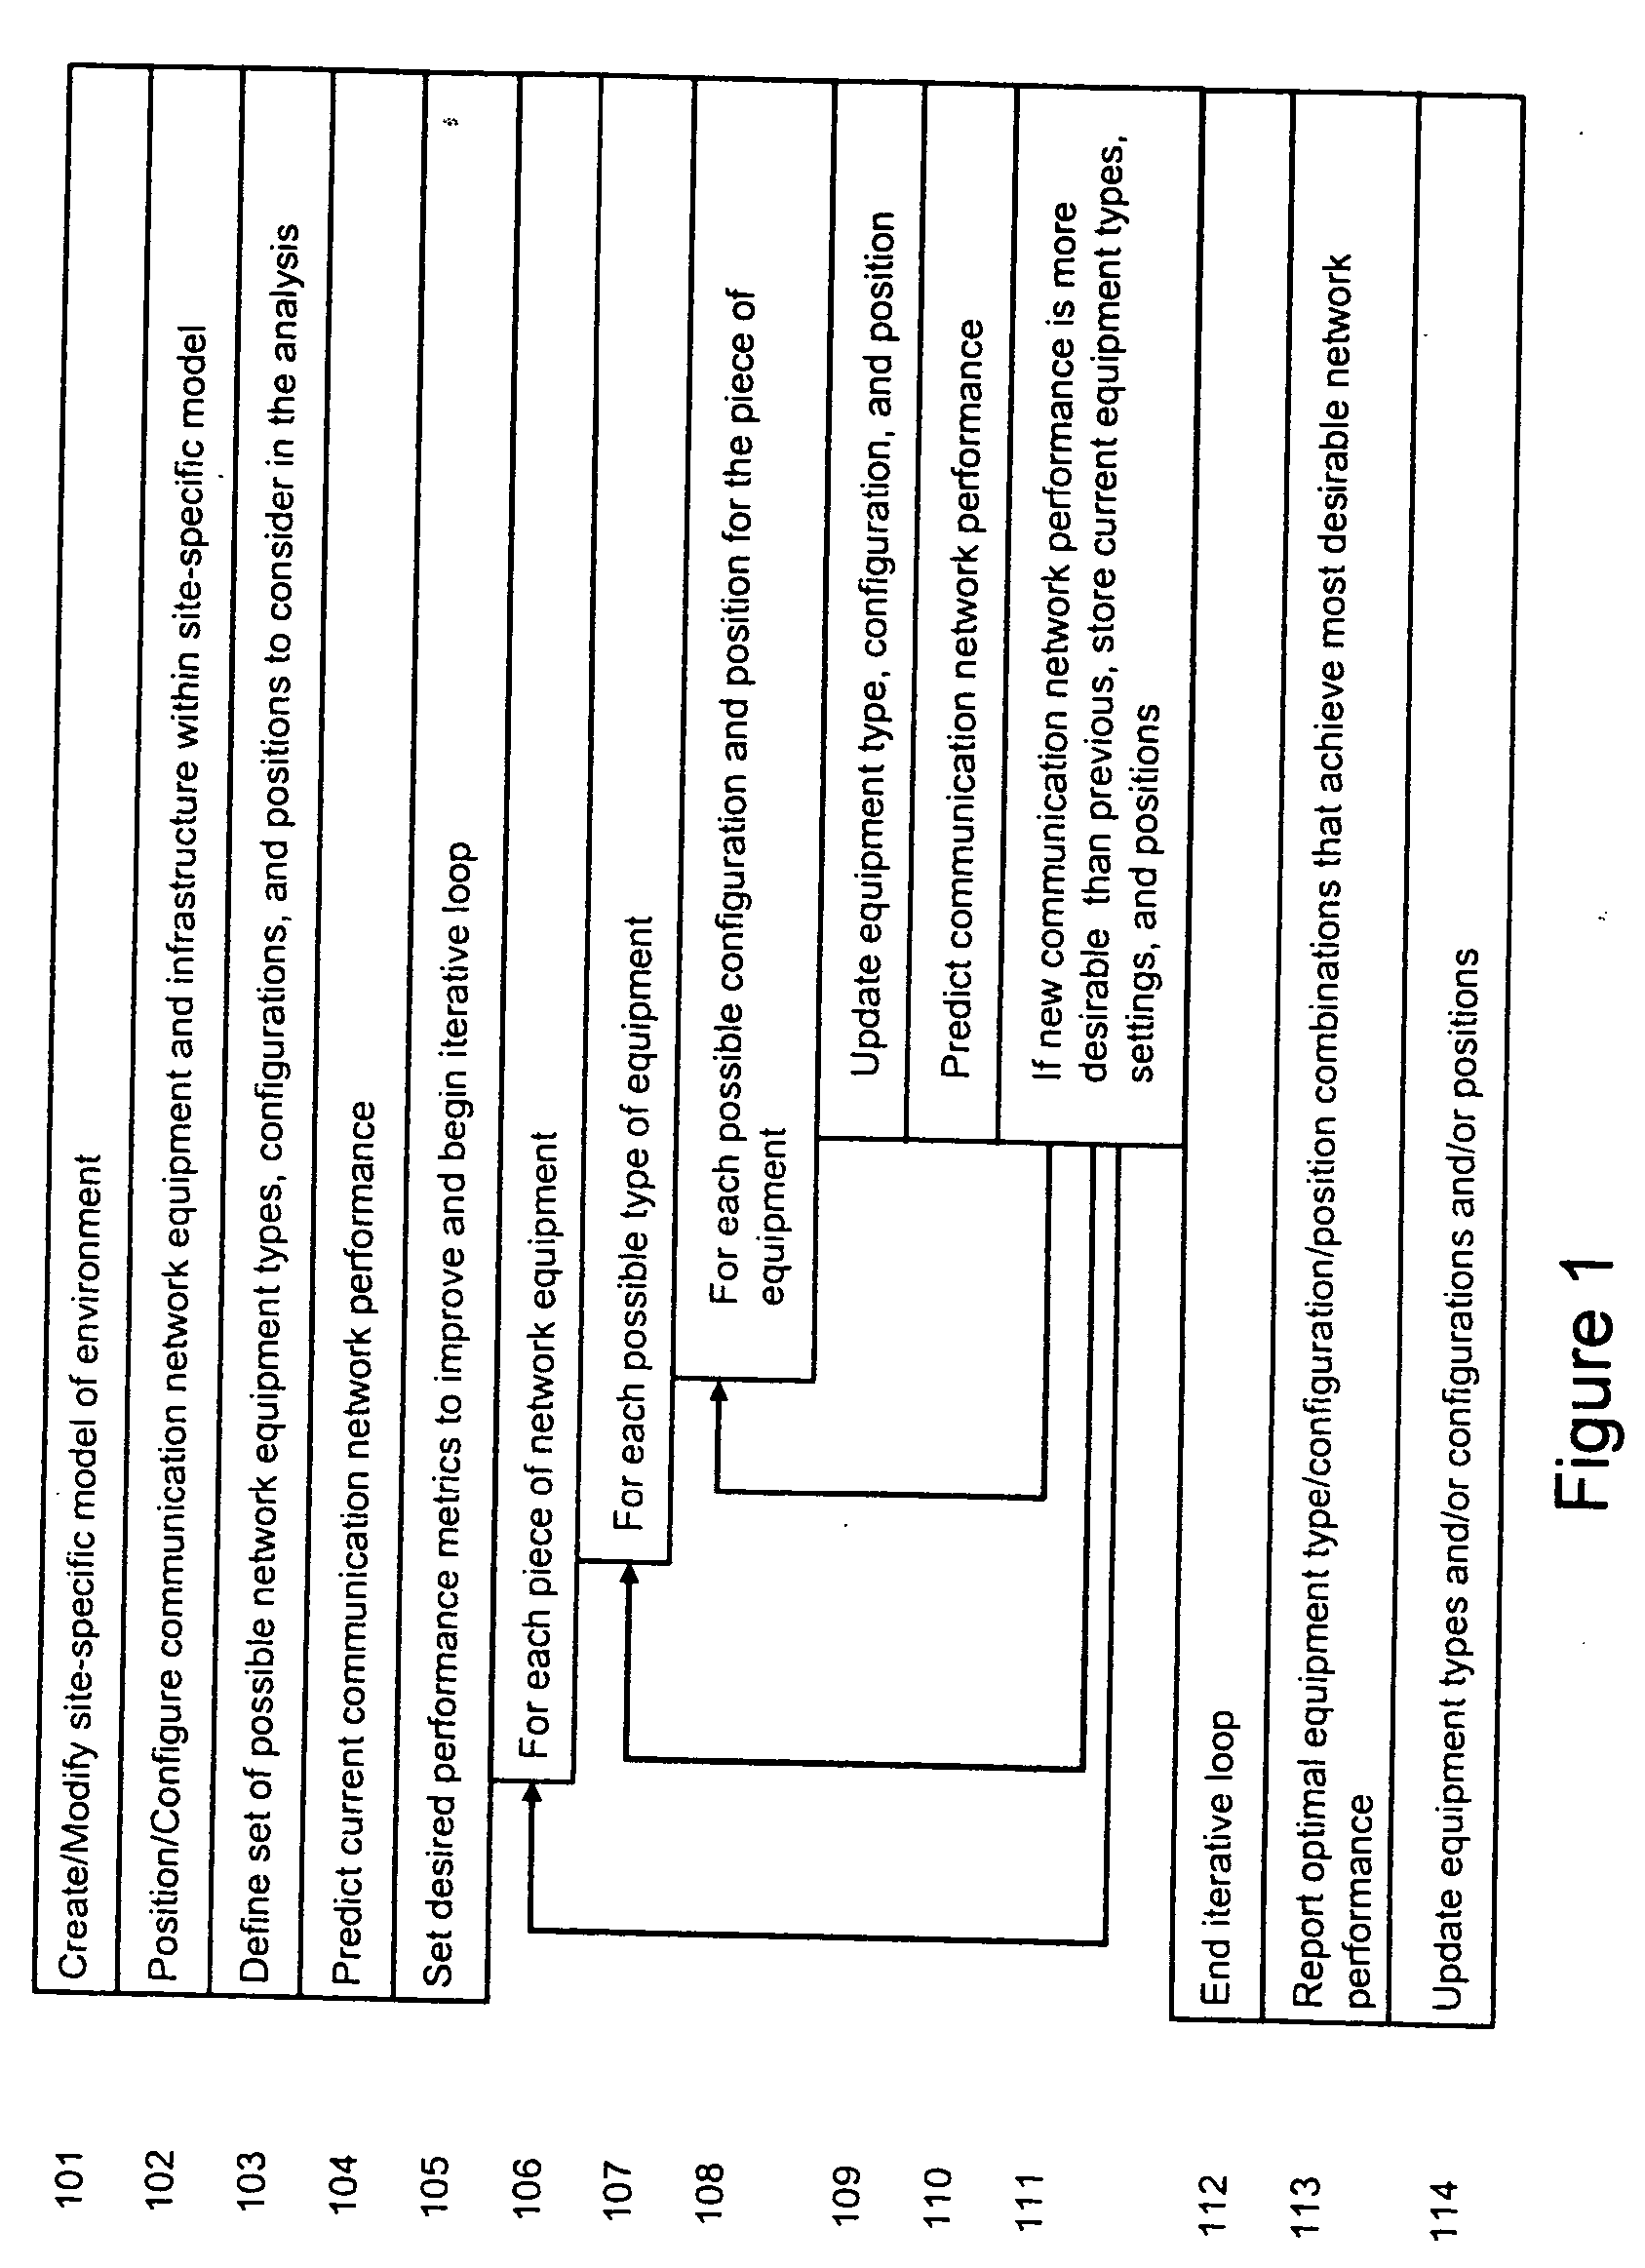 System and method for automated placement or configuration of equipment for obtaining desired network performance objectives and for security, RF tags, and bandwidth provisioning